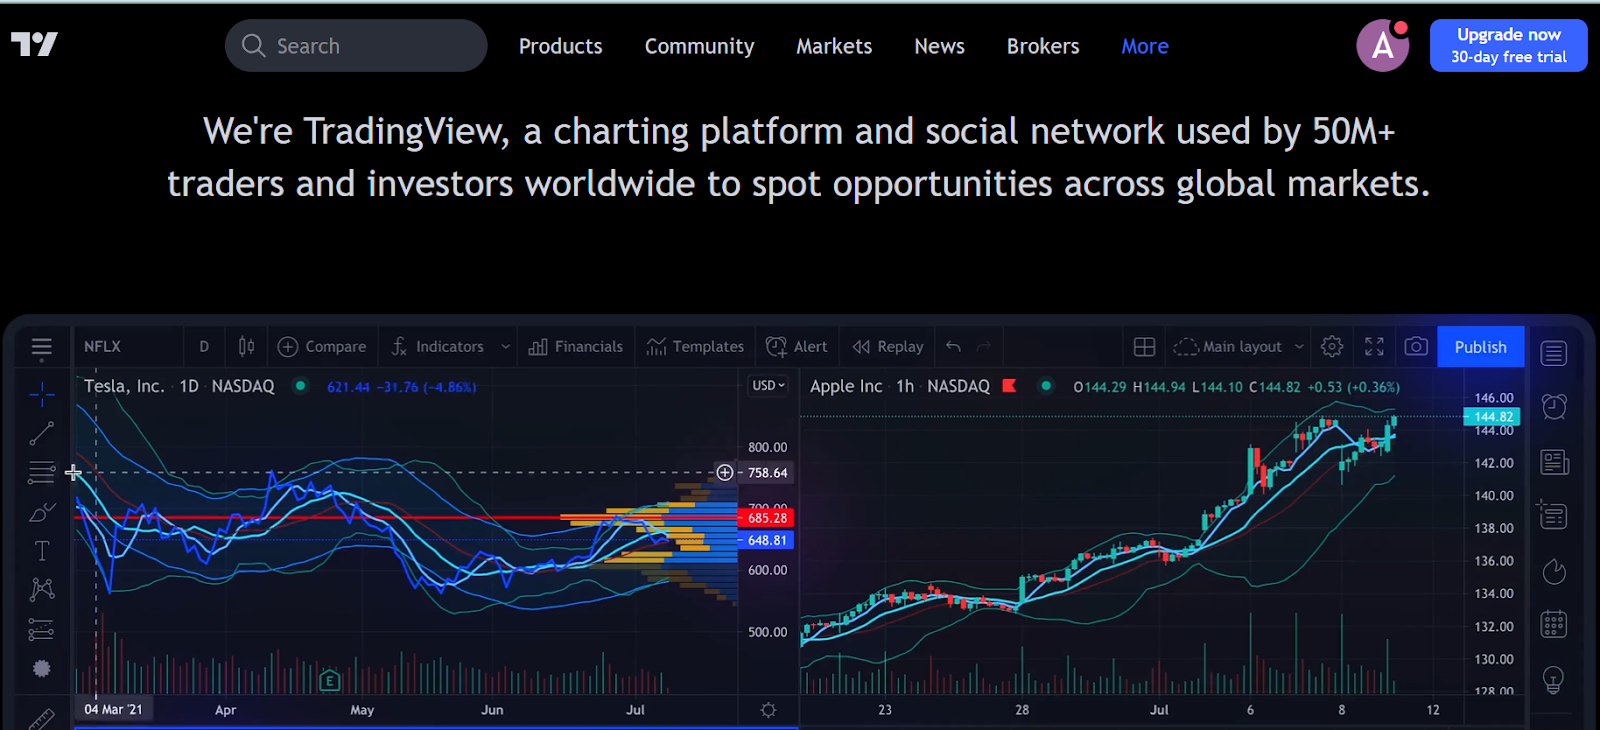 TradingView also apply Forex backtest besides chart service